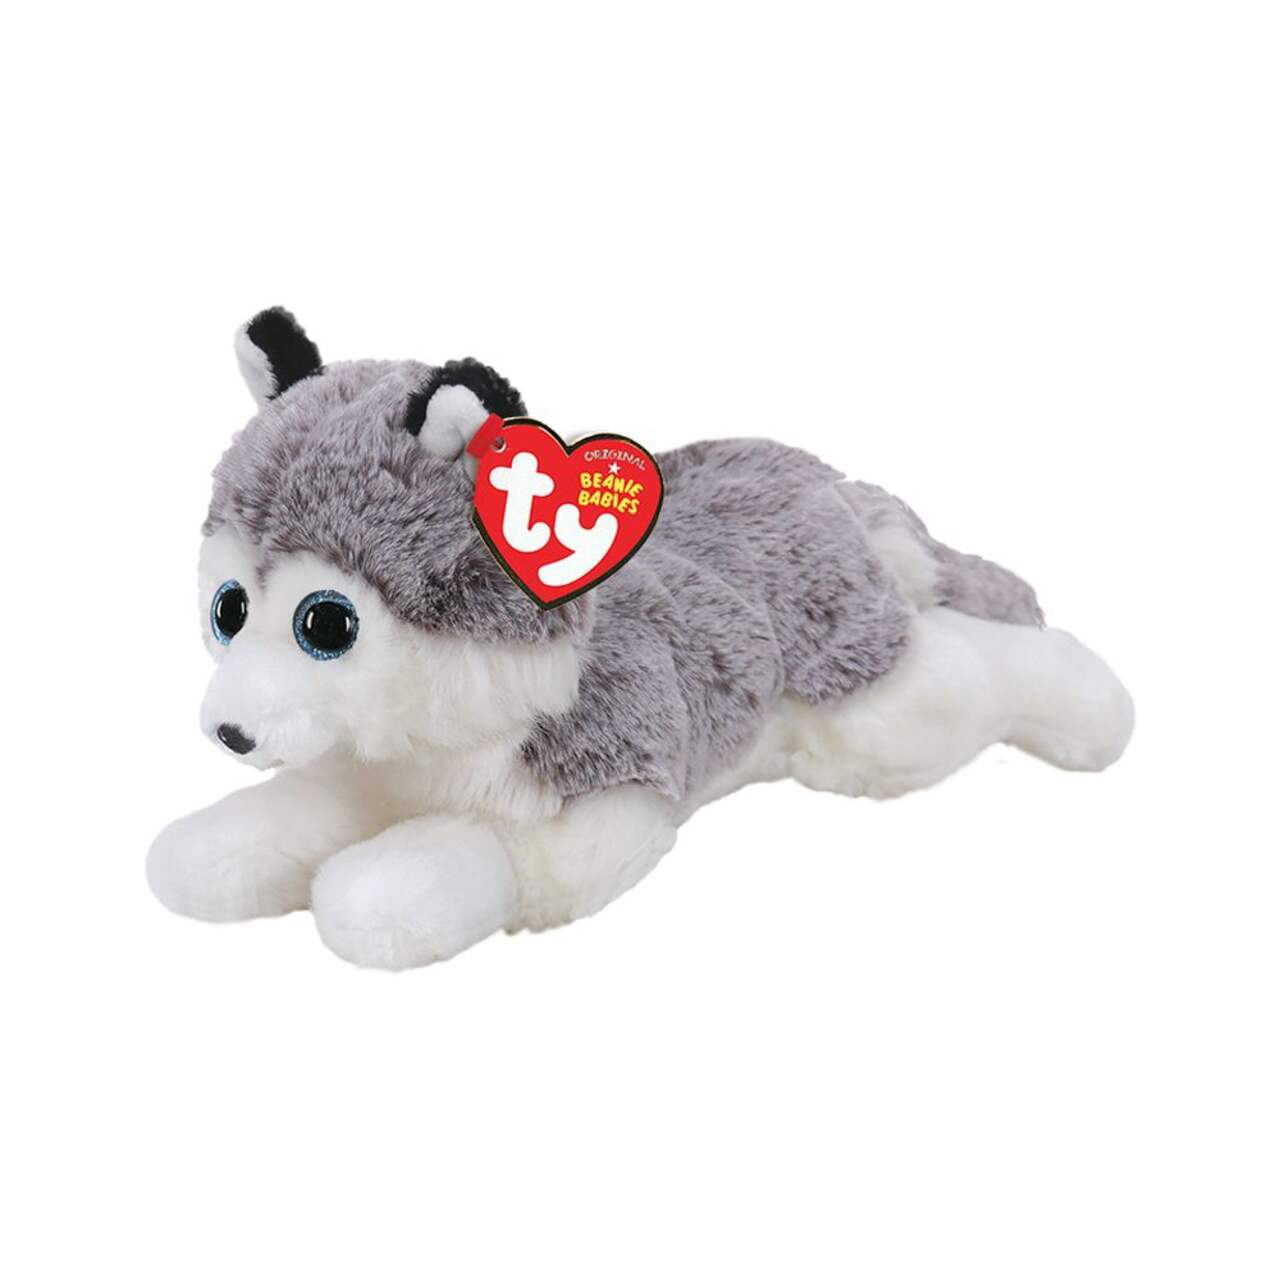 Ty Beanie Boos® Regular Recognizable Character Plush Animal Stuffed Toy,  Baltic the Husky Dog, Ages 3+